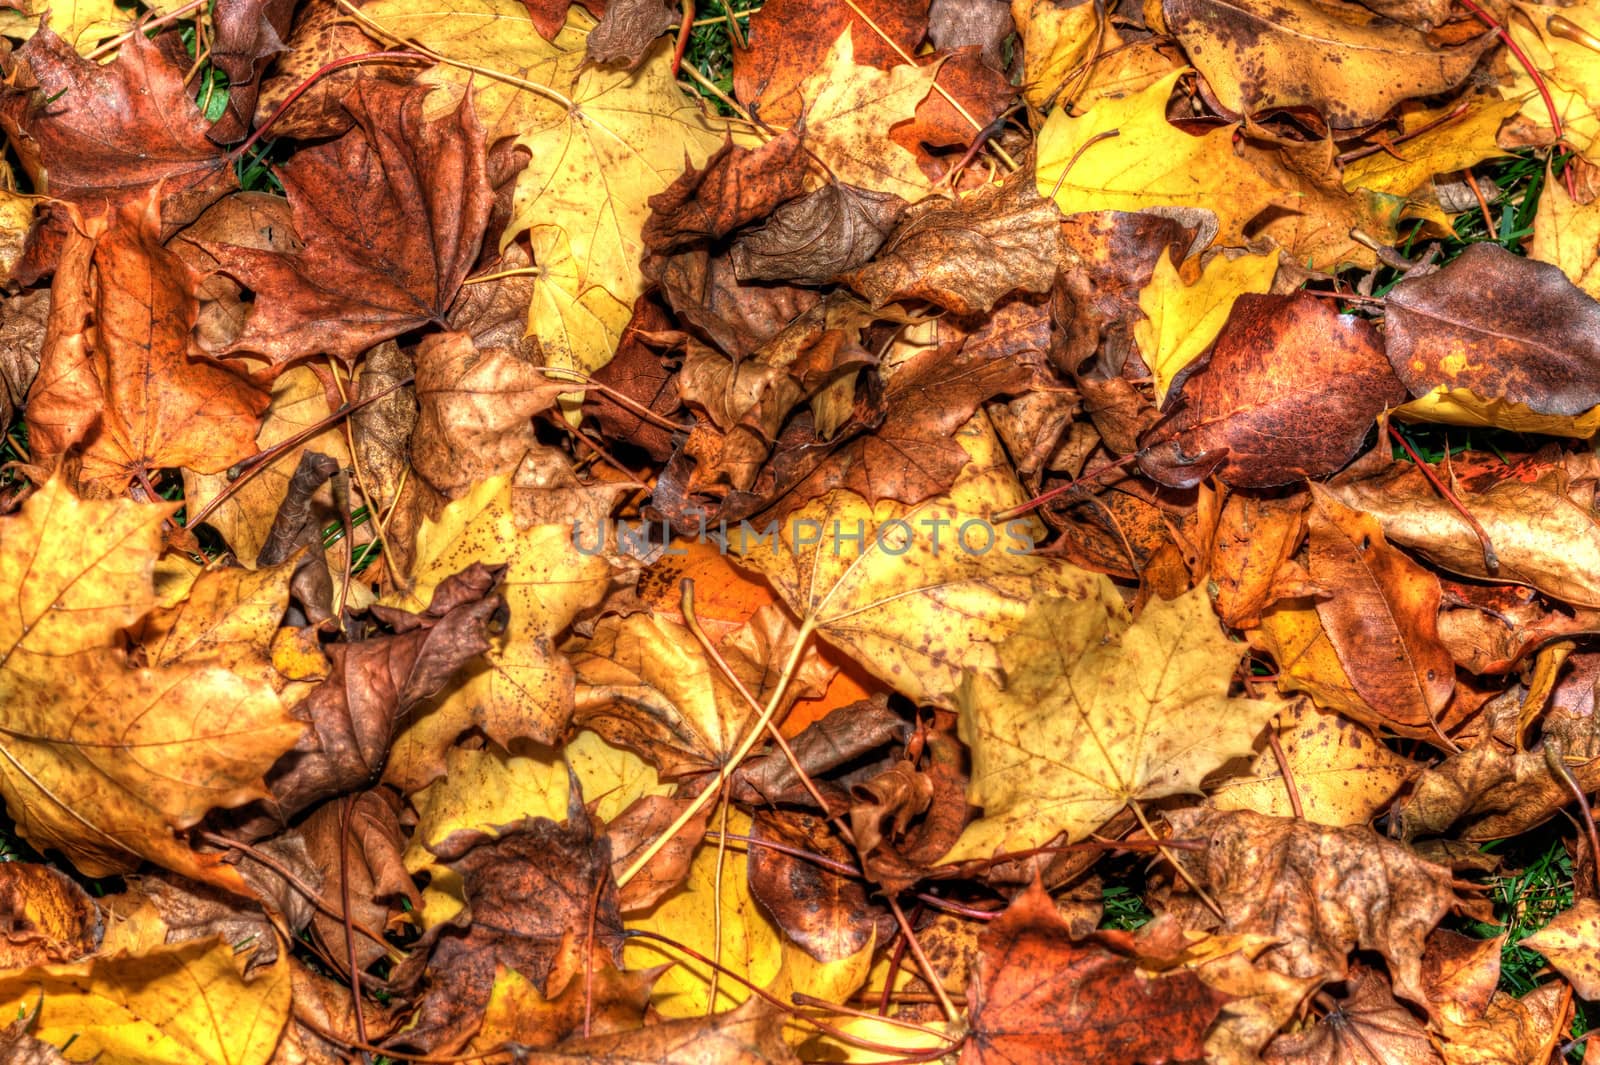 Colorful Autumn Leaves Background in HDR High Dynamic Range by Coffee999